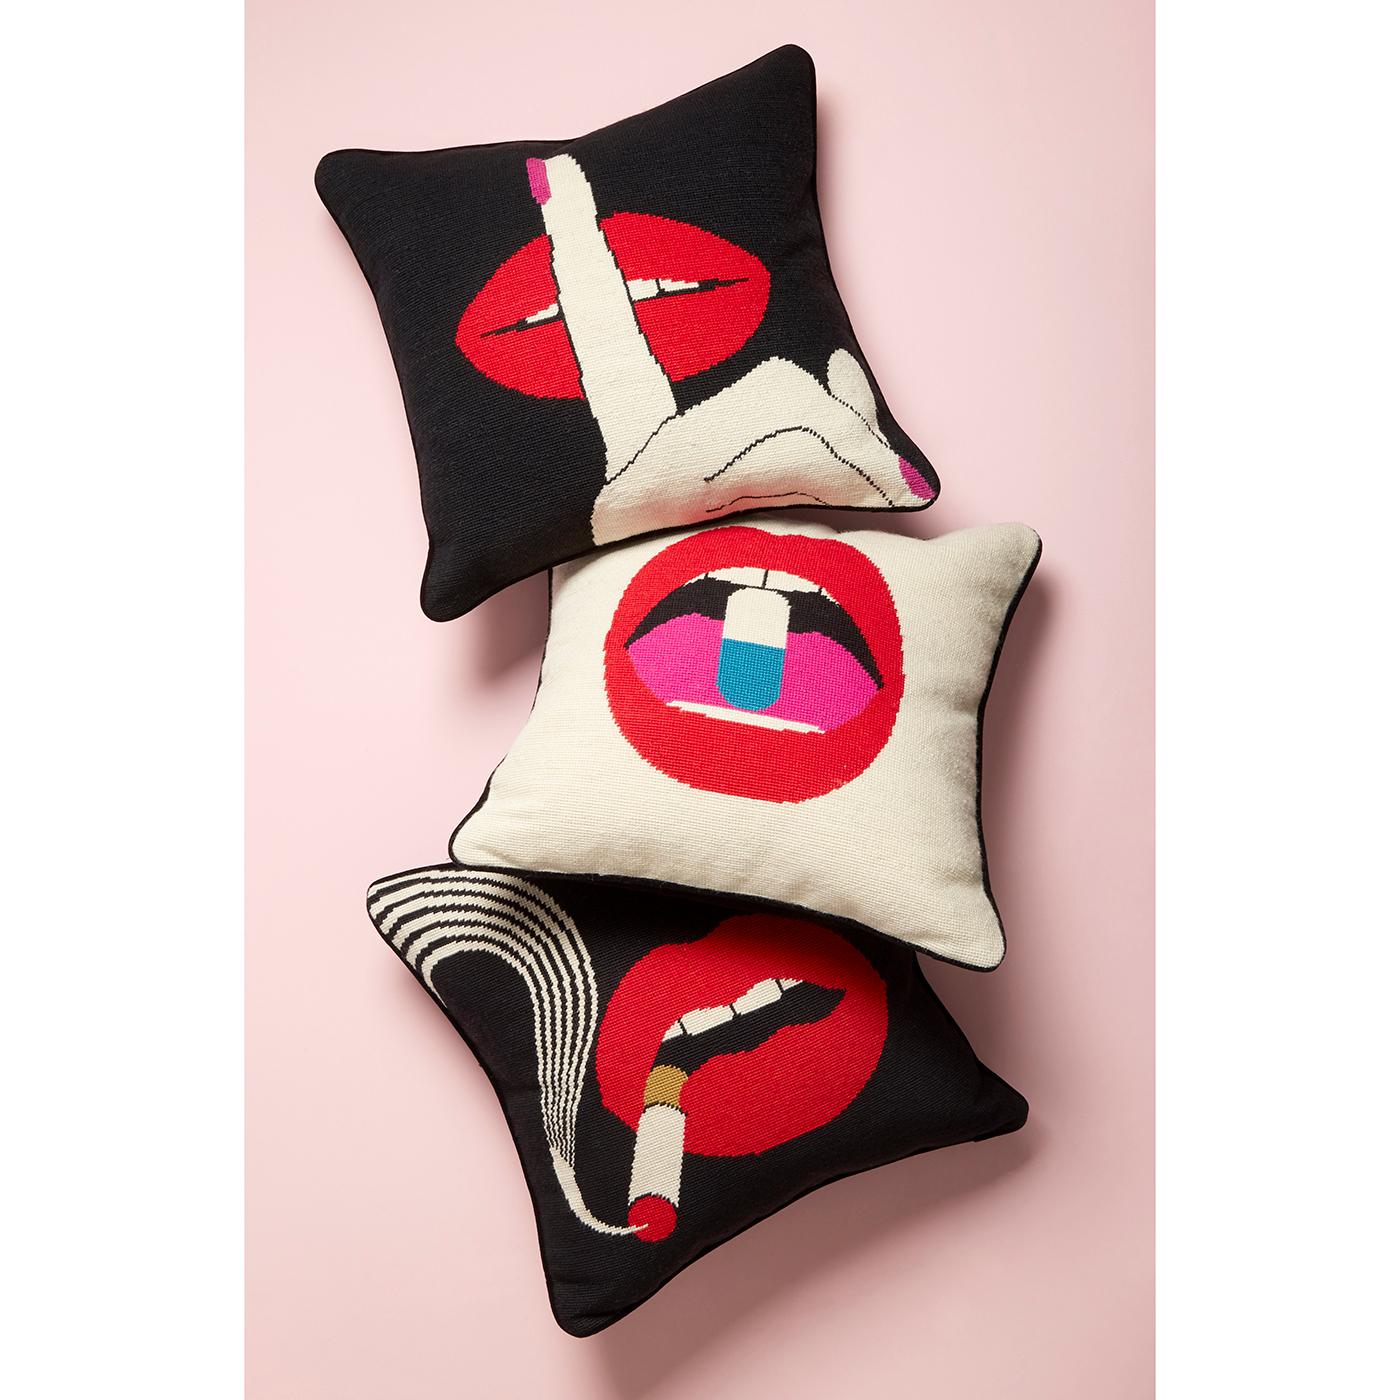 American Lips ‘Full Dose’ Needlepoint Throw Pillow